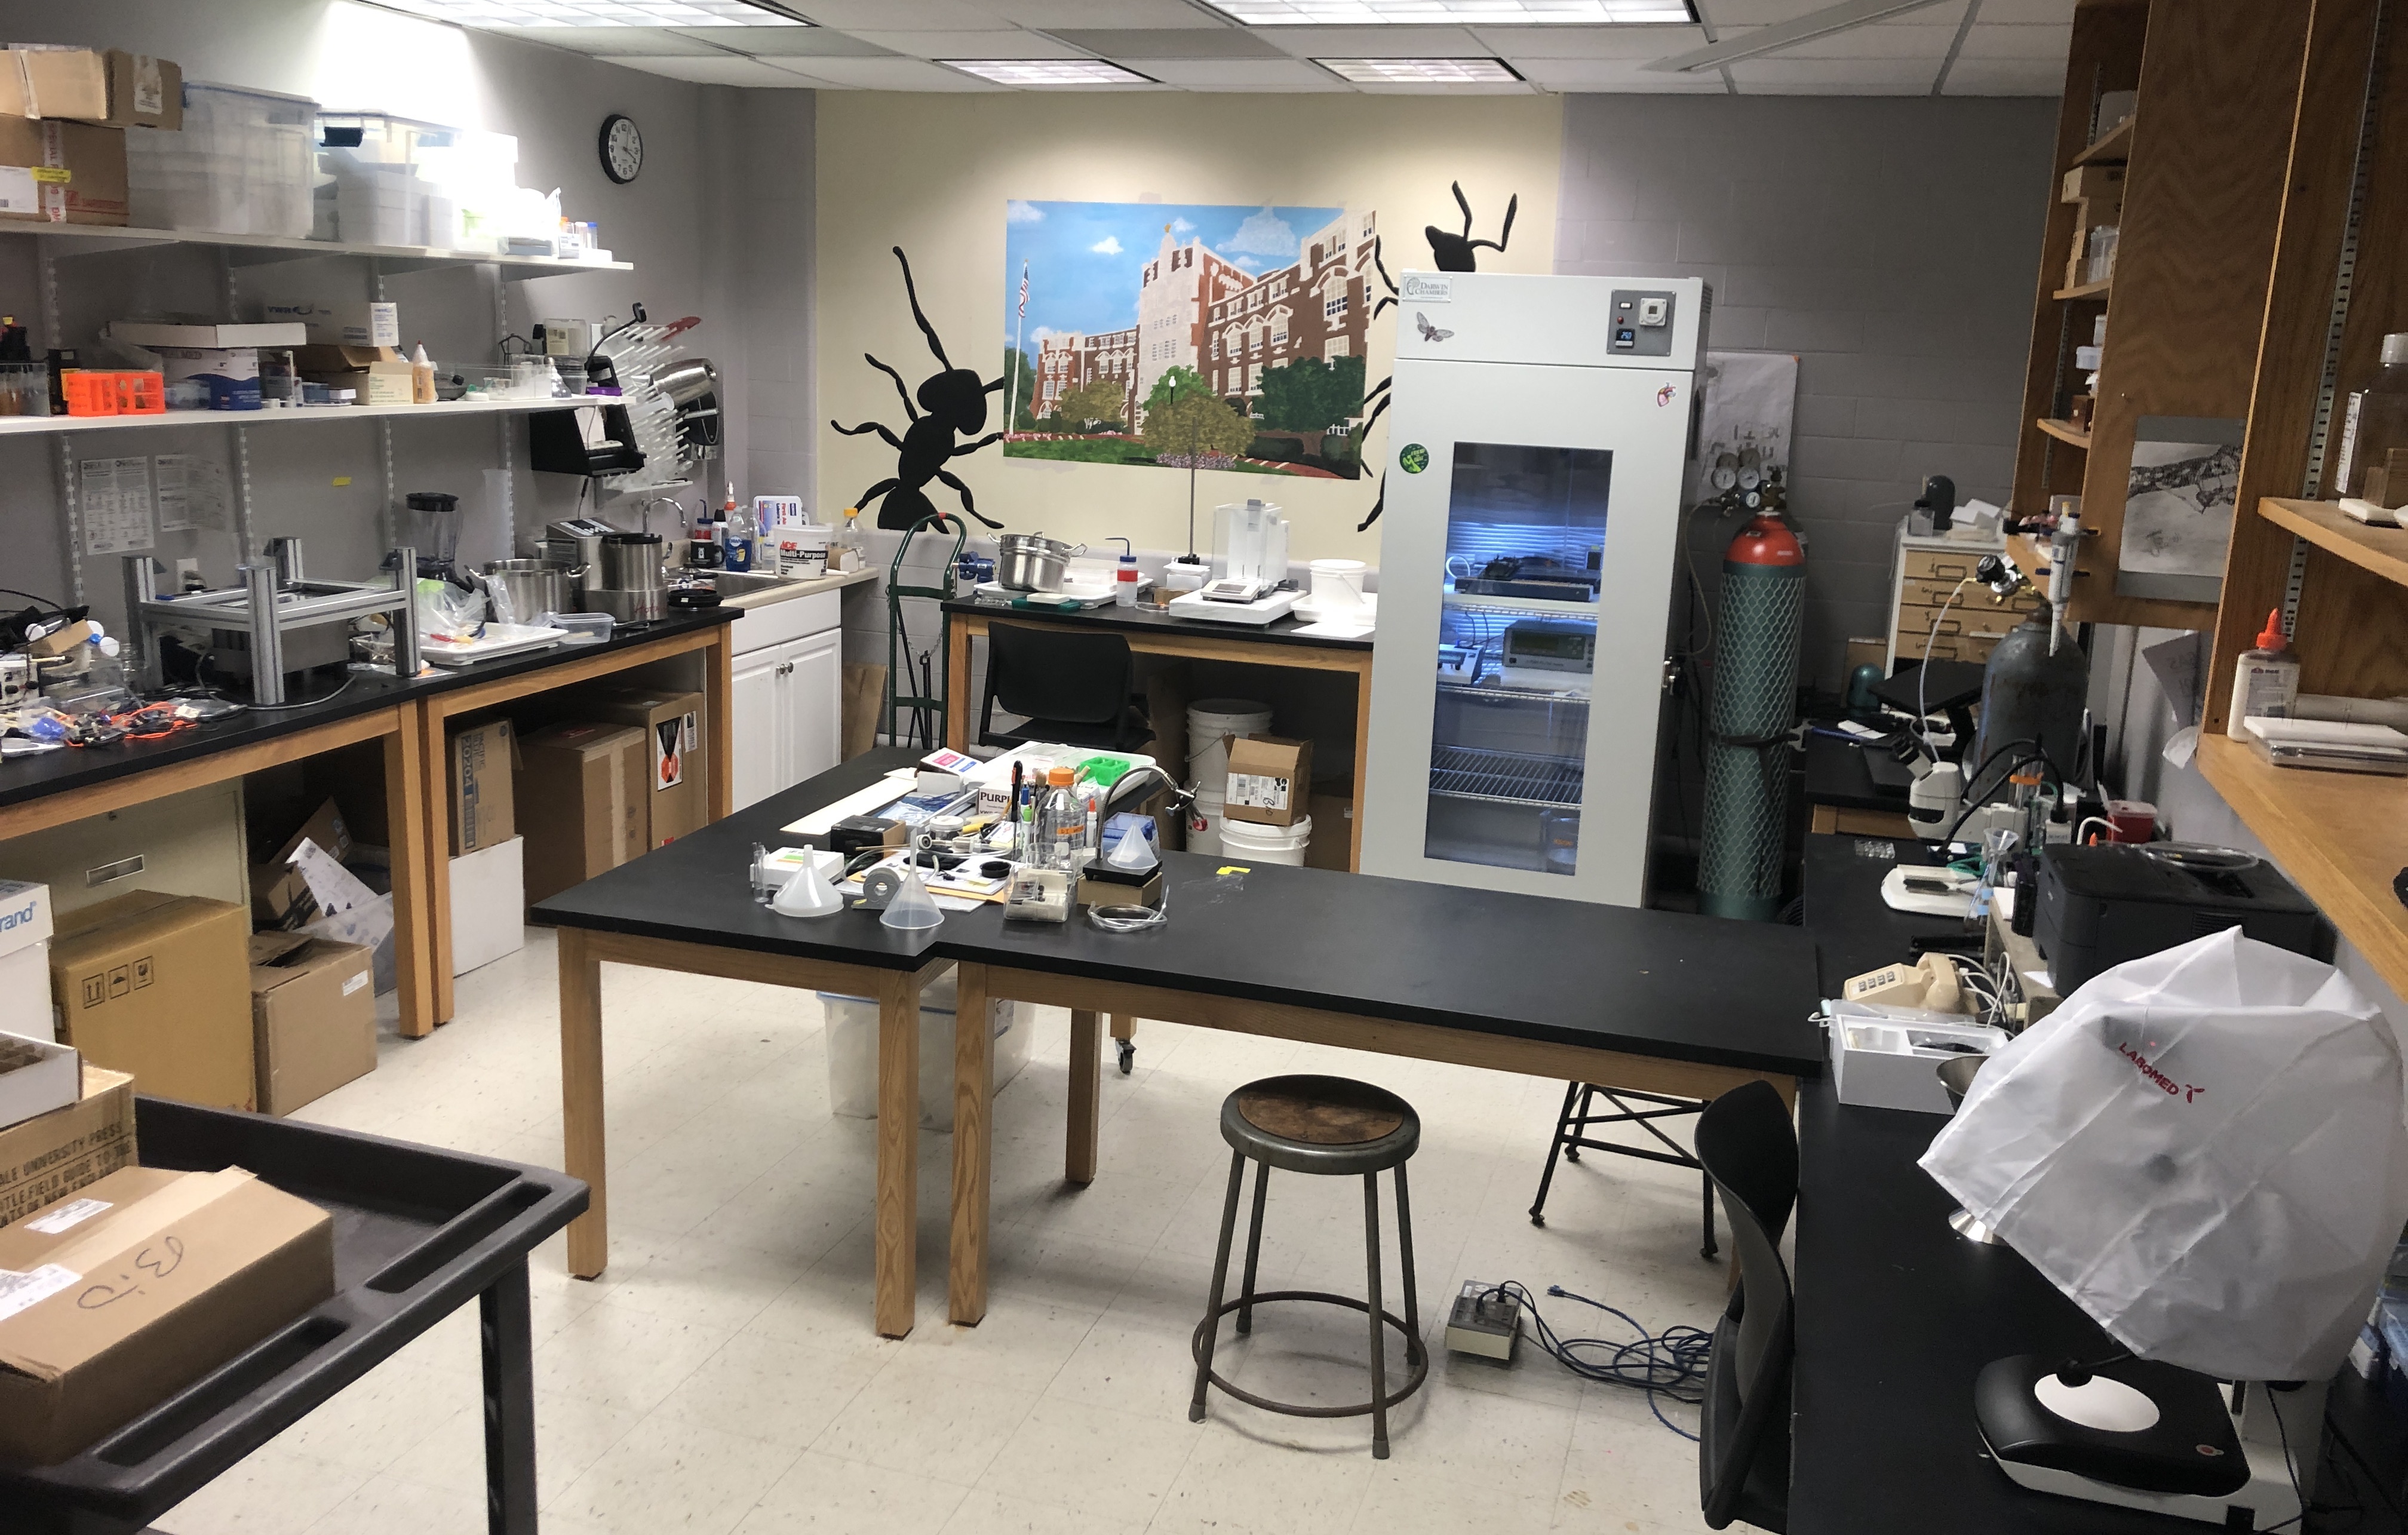 Waters Lab in the Science Complex RM LL79, lab benches and equipment